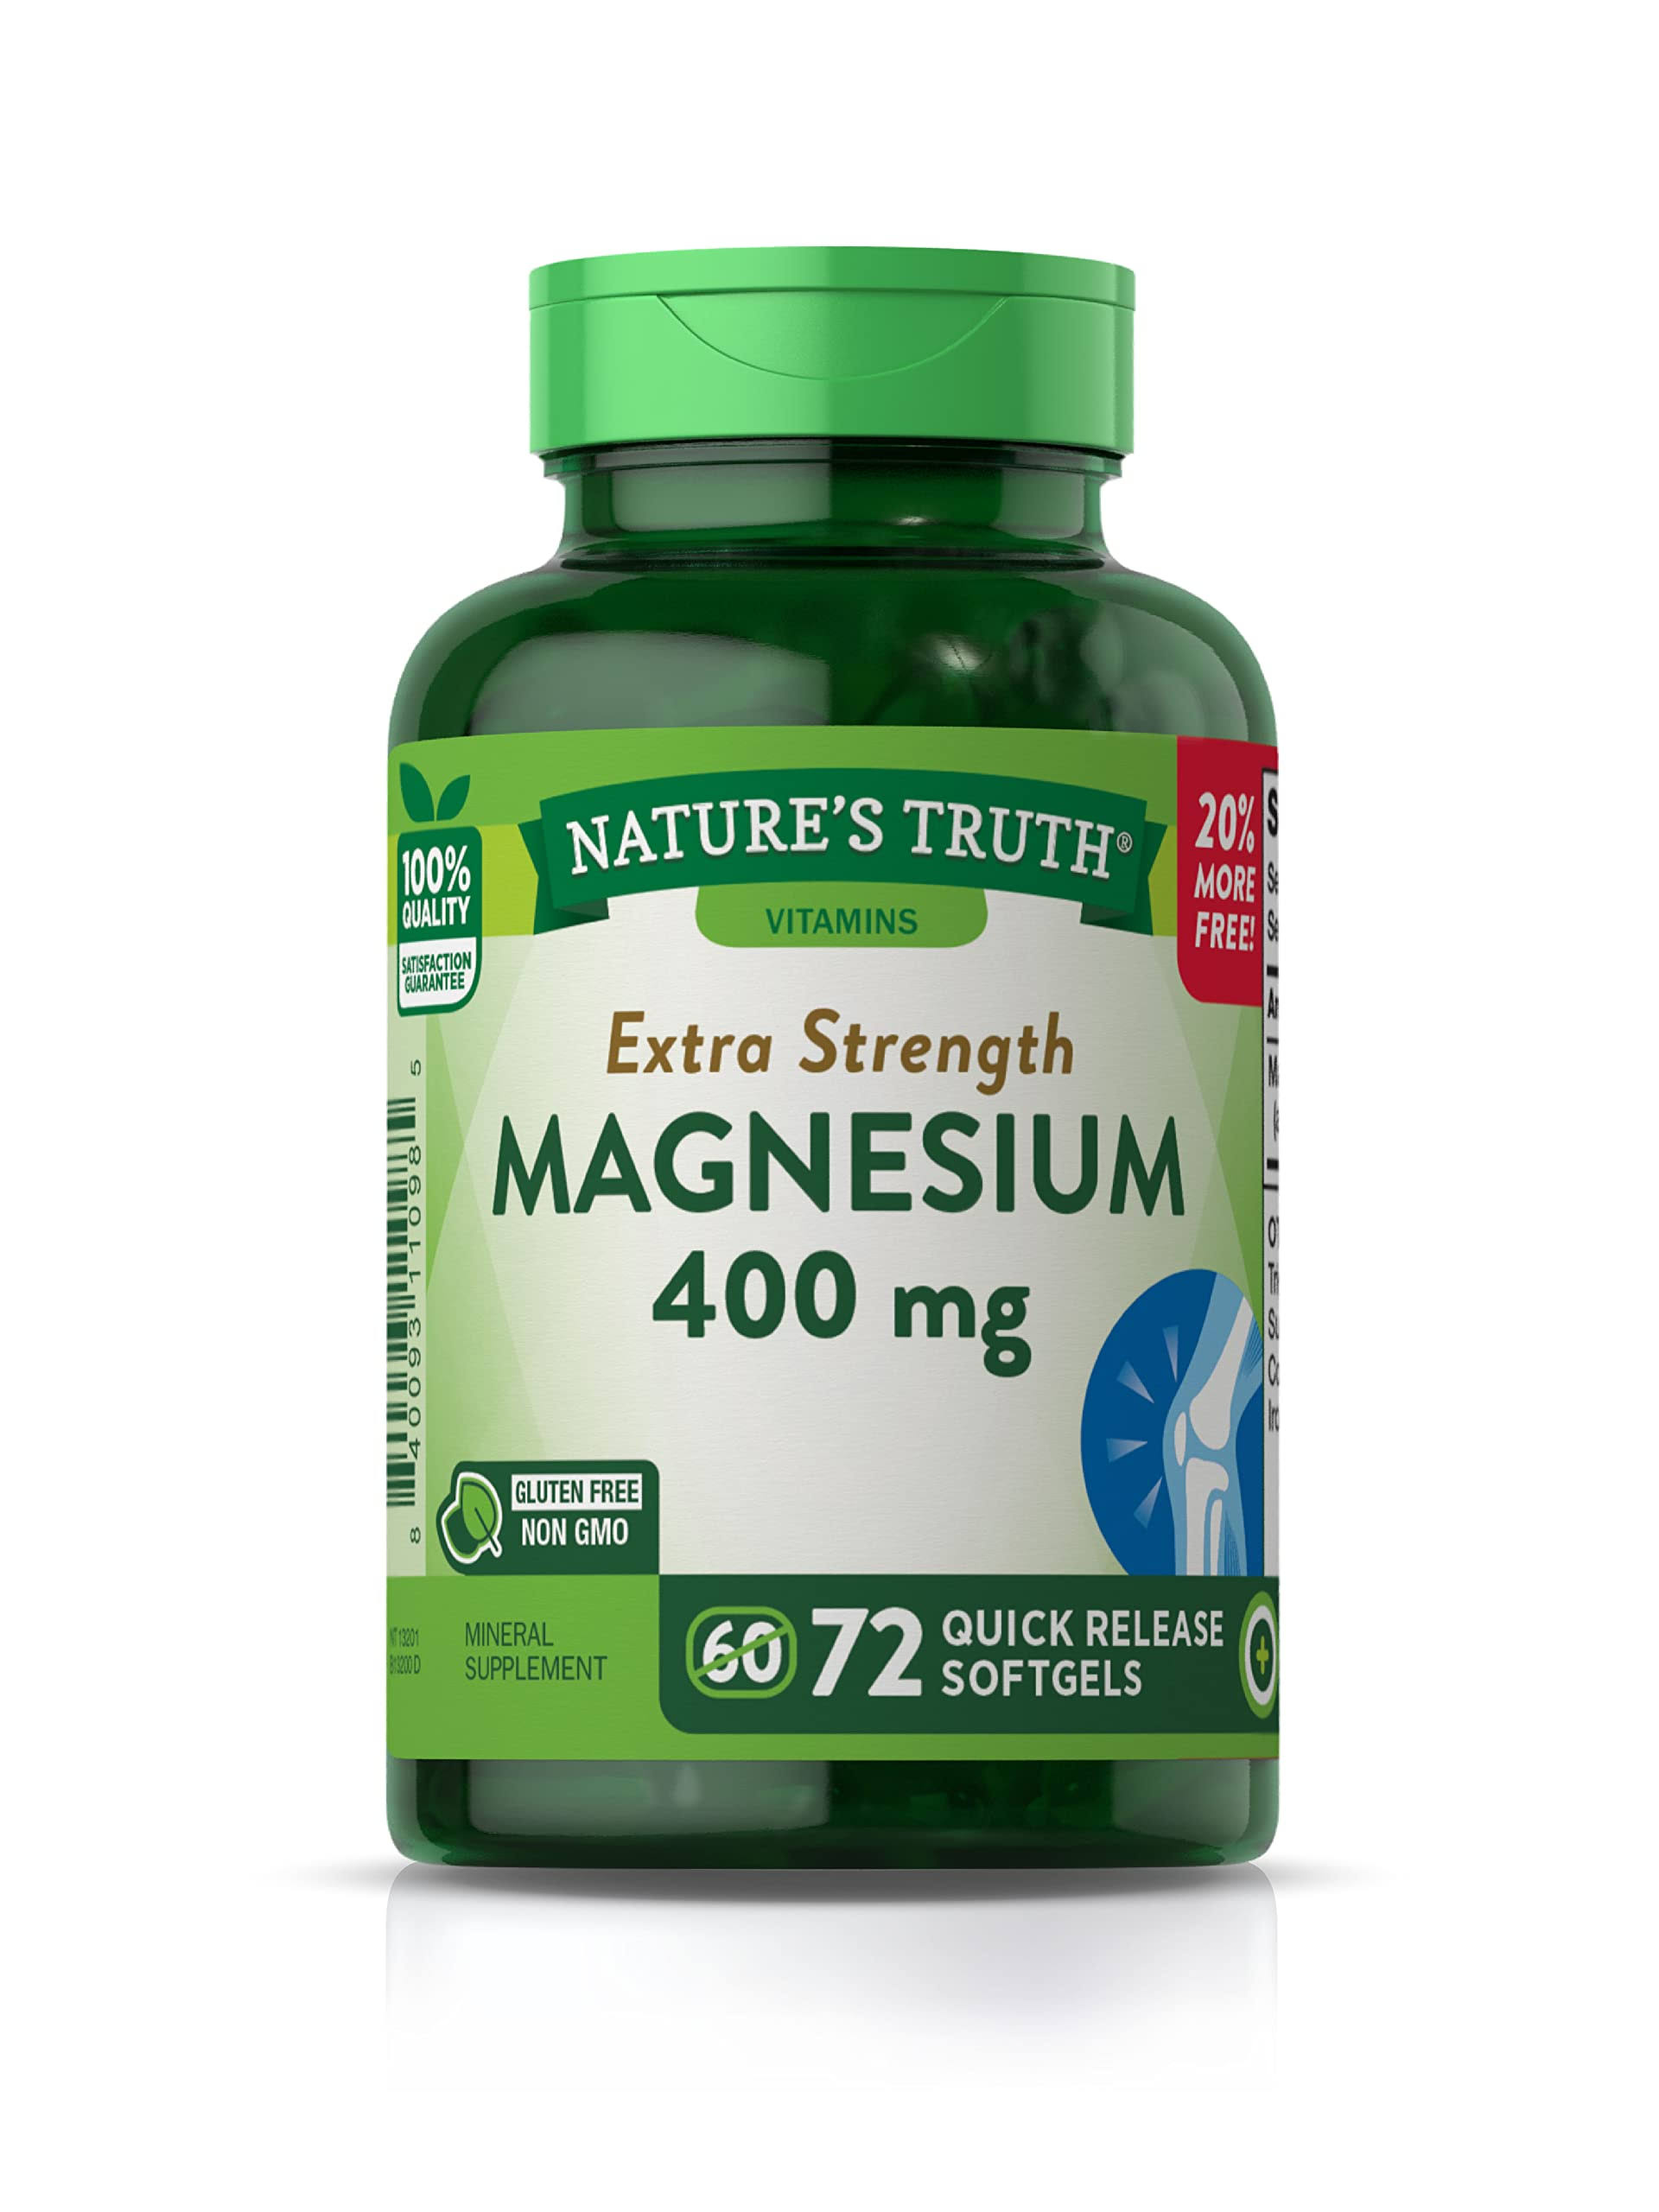 Natures Truth Magnesium, High Potency, 400 mg, Quick Release Softgels - 72 softgels